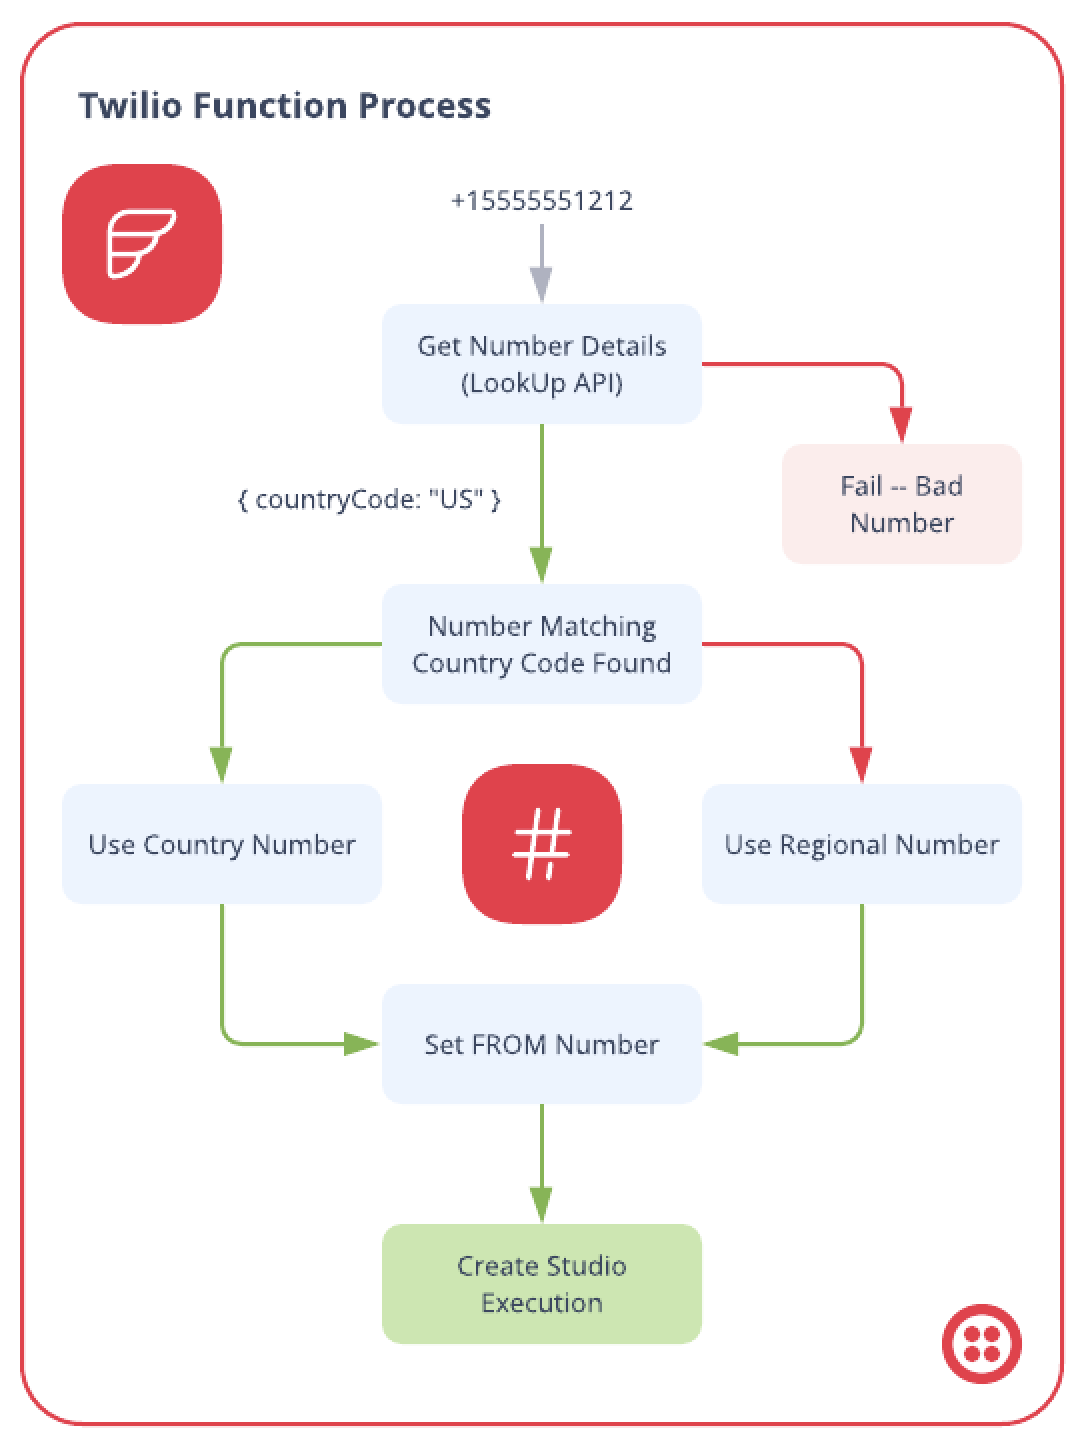 Twilio Function architecture diagram showing how to pick an appropriate outbound number